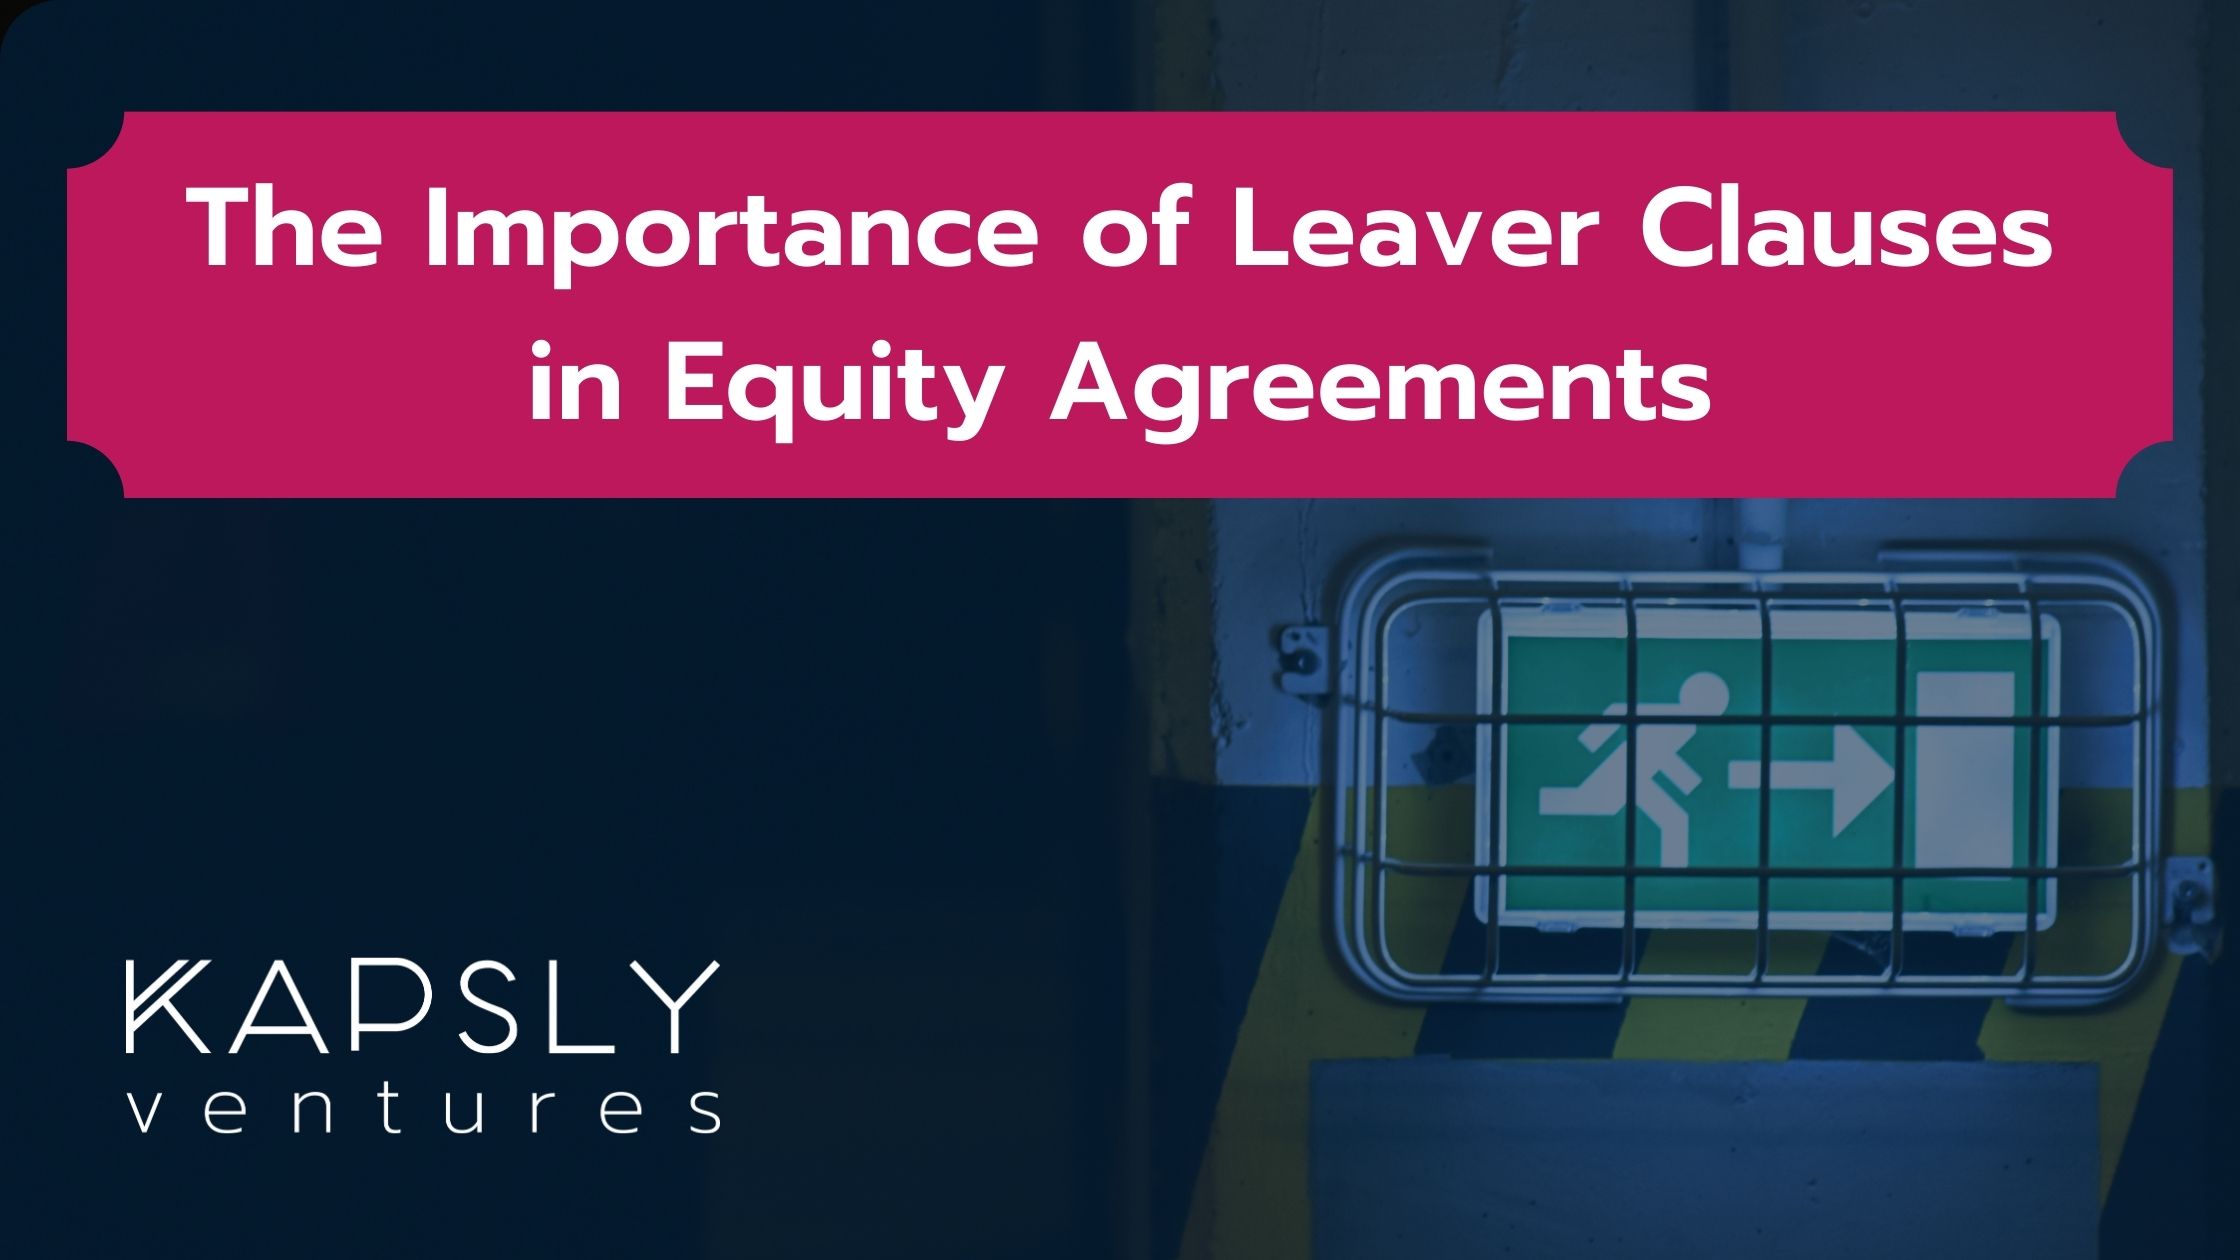 The Importance of Leaver Clauses in Equity Agreements